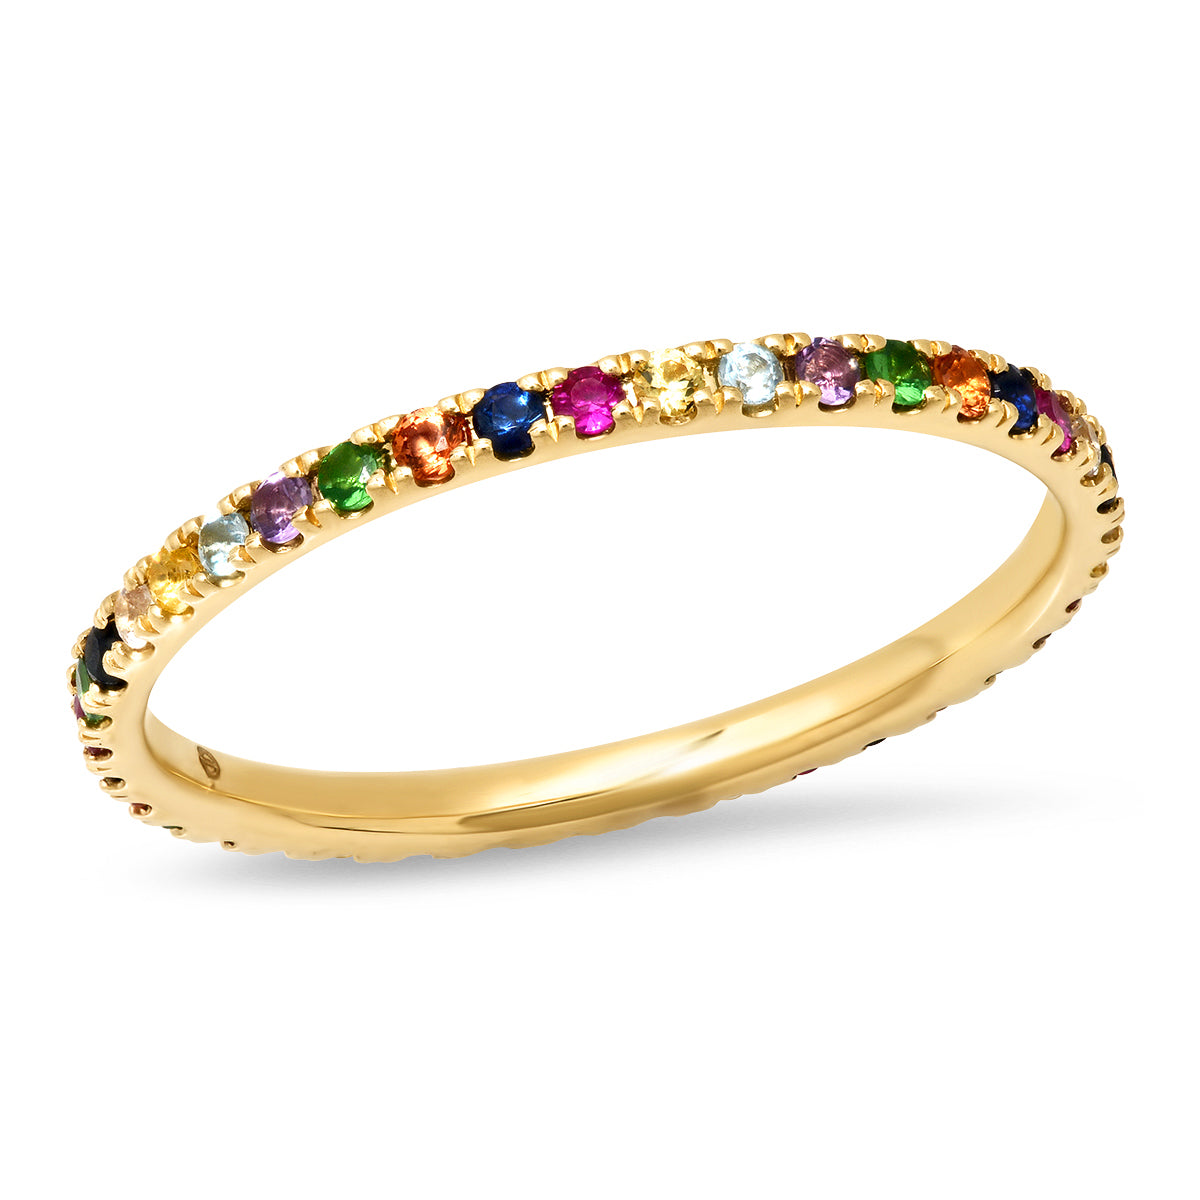 14K Yellow Gold Multi Colored Eternity Band